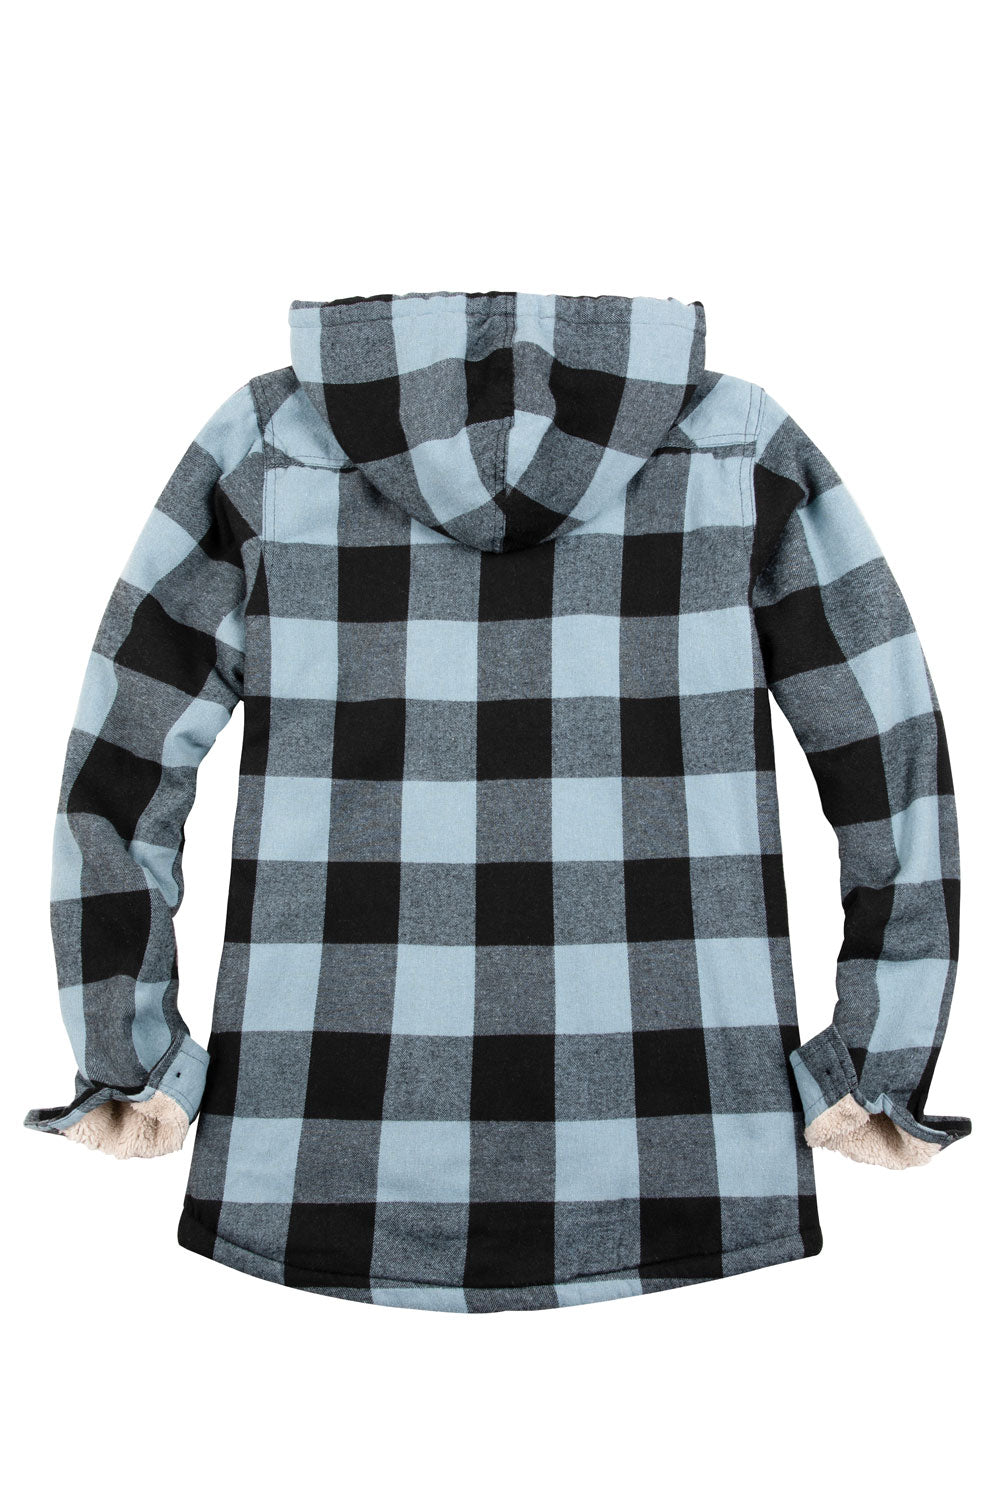 Women's Sherpa Lined Flannel Jacket with Hood,Button Up Plaid